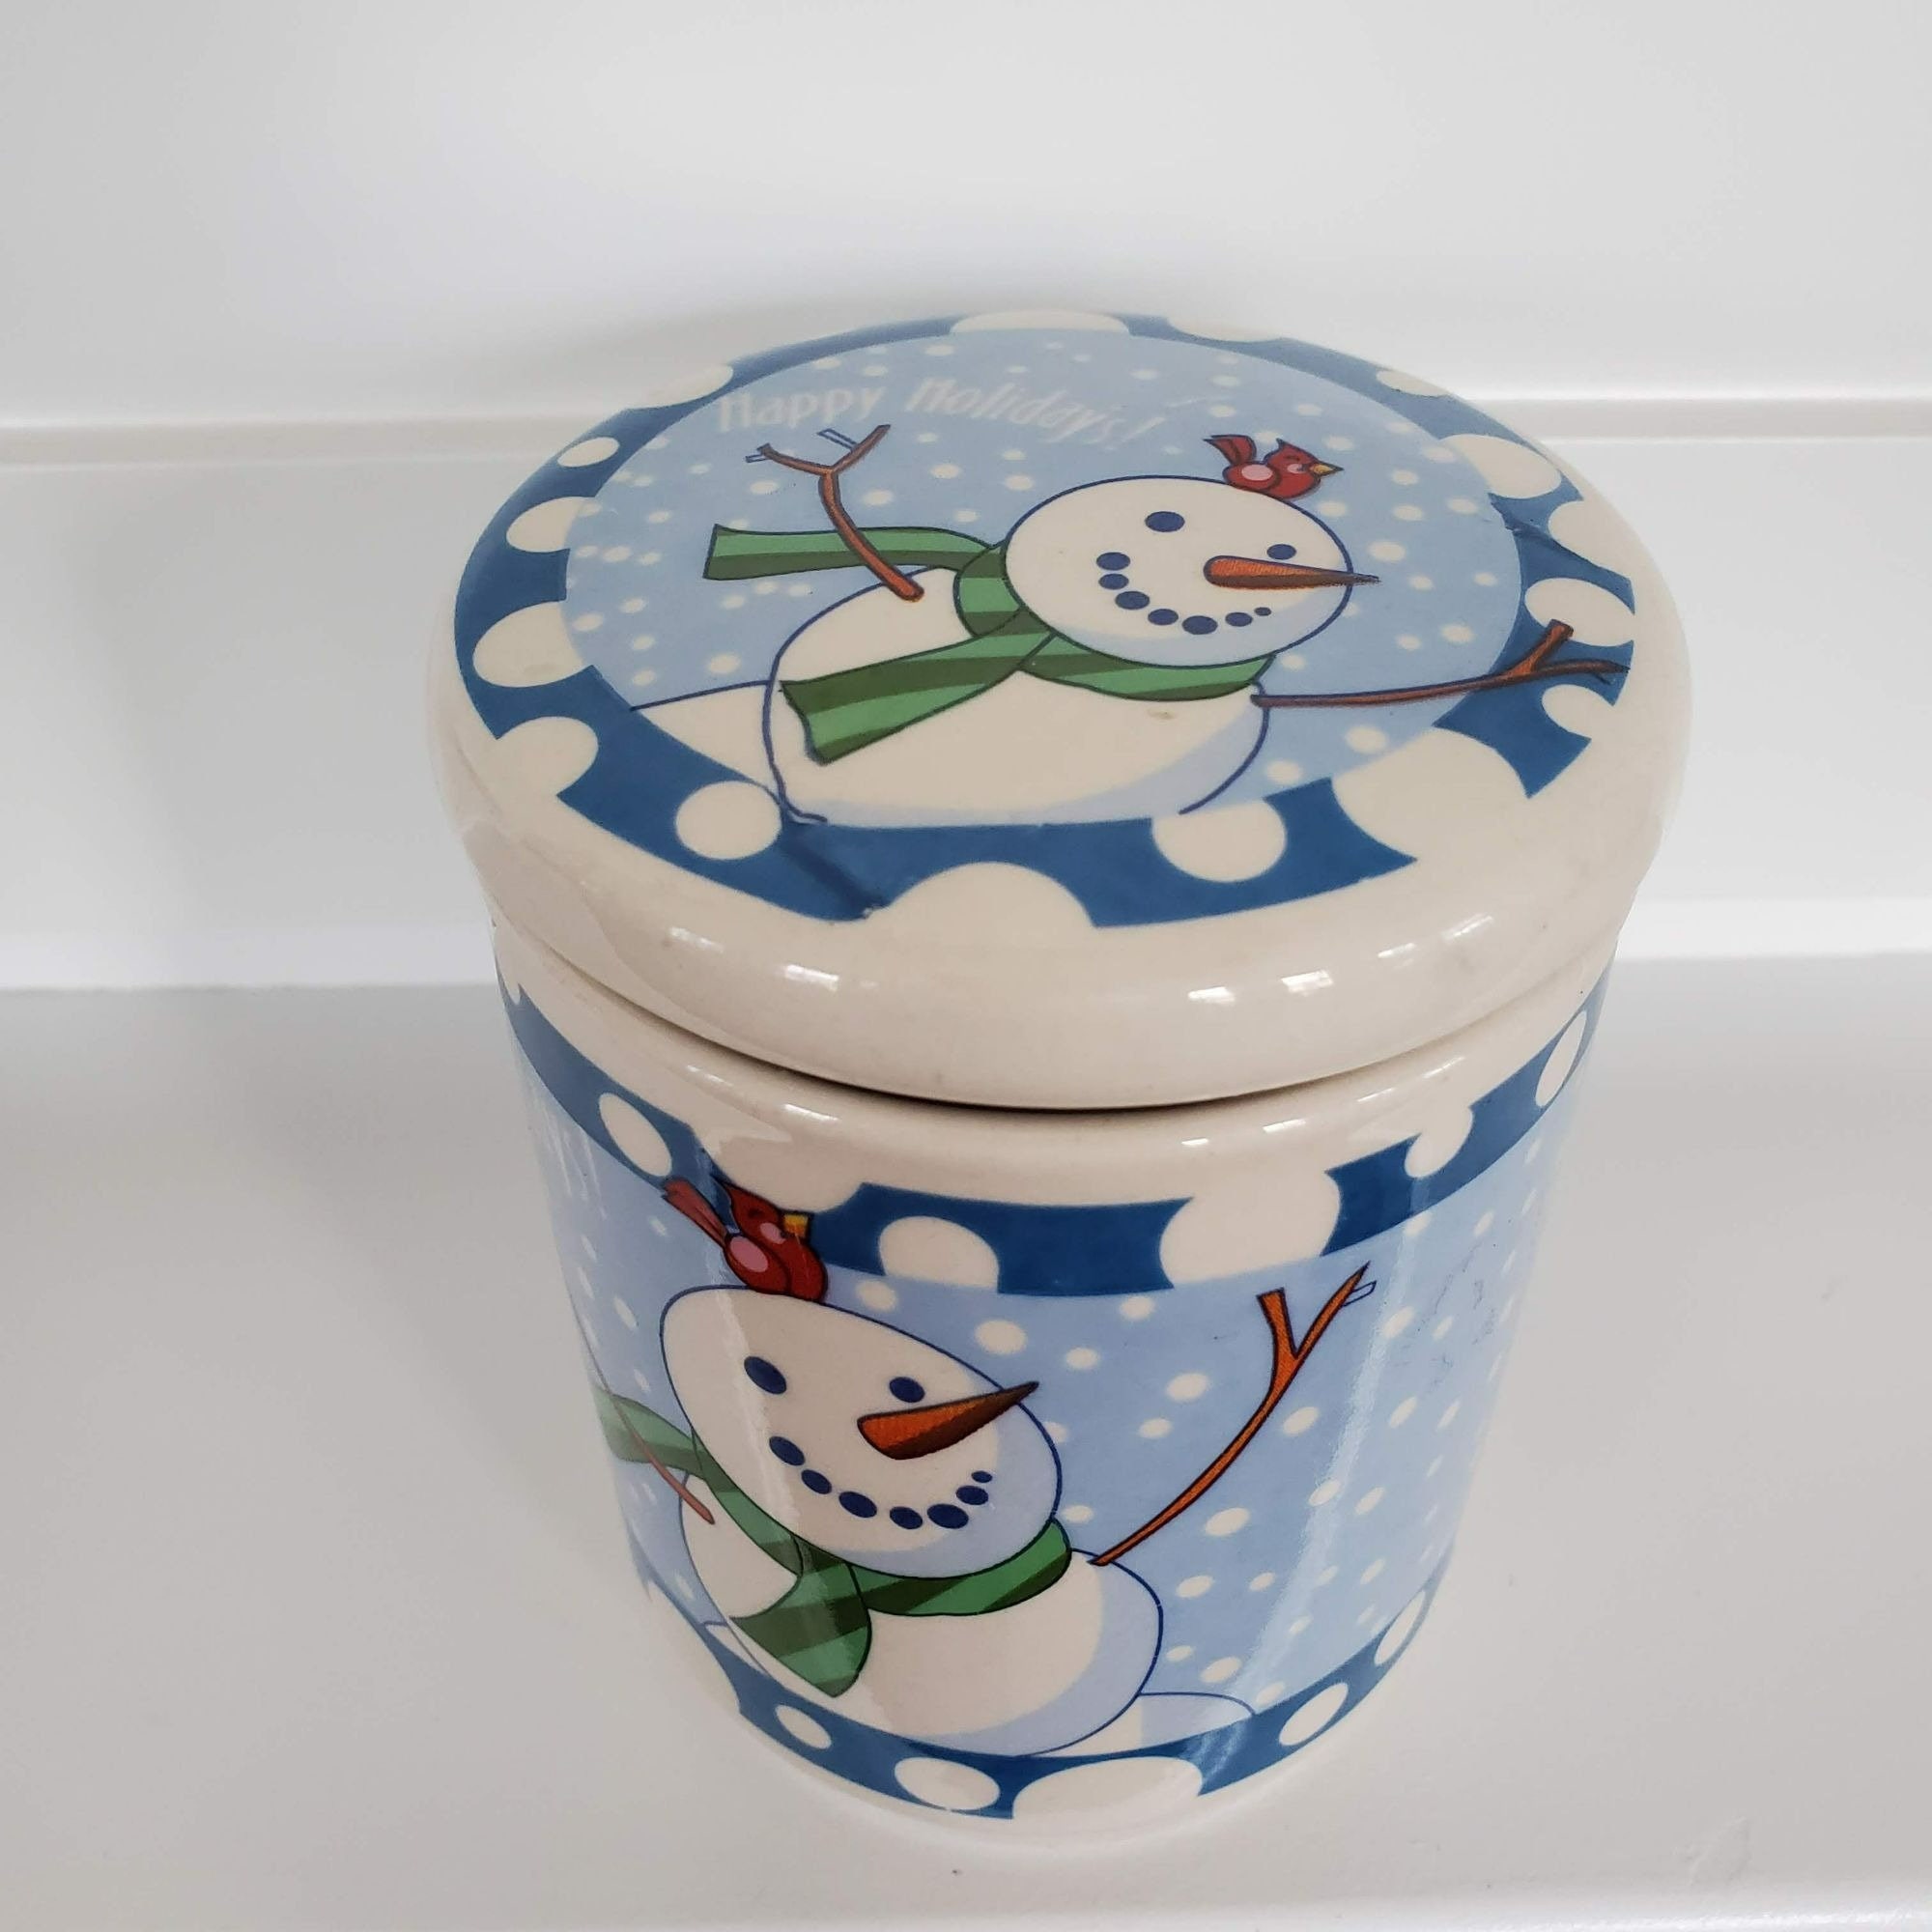 Decorative Christmas Holiday Themed Plastic Containers Jars 4 Pack with  Stackable Lids for Cookies, Snacks, Candies, Treats Gnomes, Gingerbread  Men